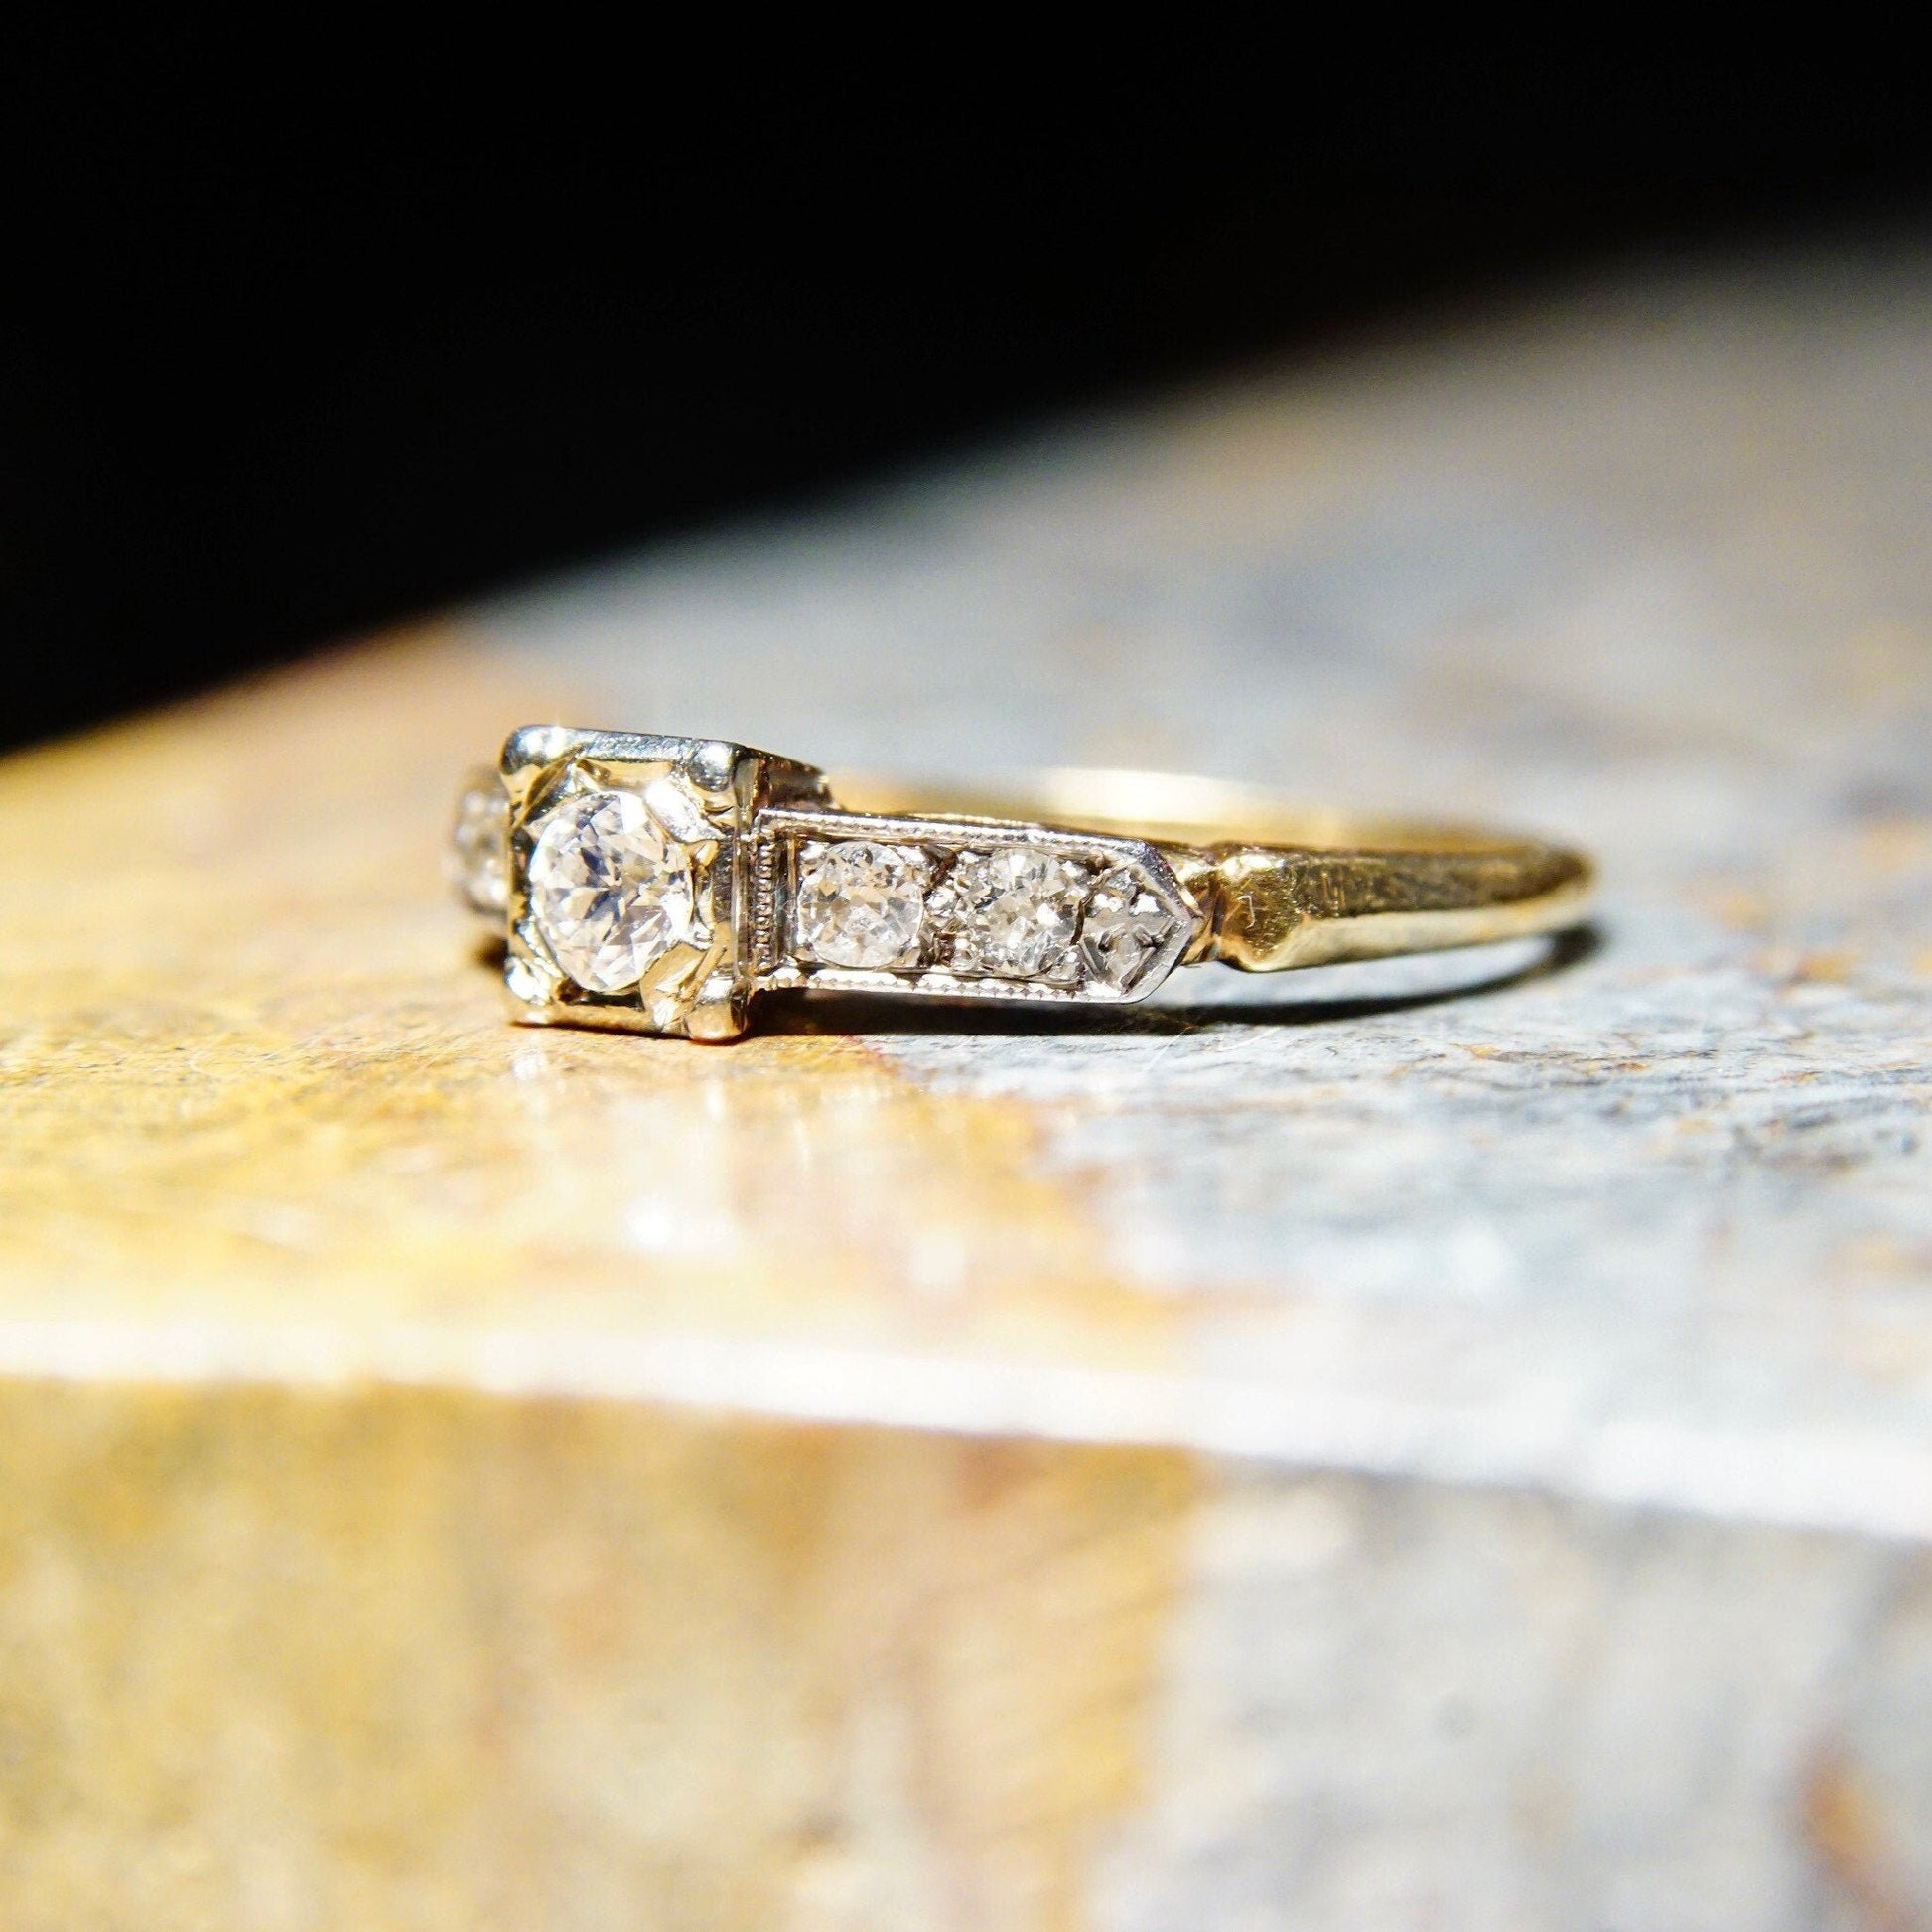 Vintage 14K and 18K gold diamond engagement ring with yellow gold band, white gold settings, and 0.14 carat old European cut center stone, size 6 1/4 US.